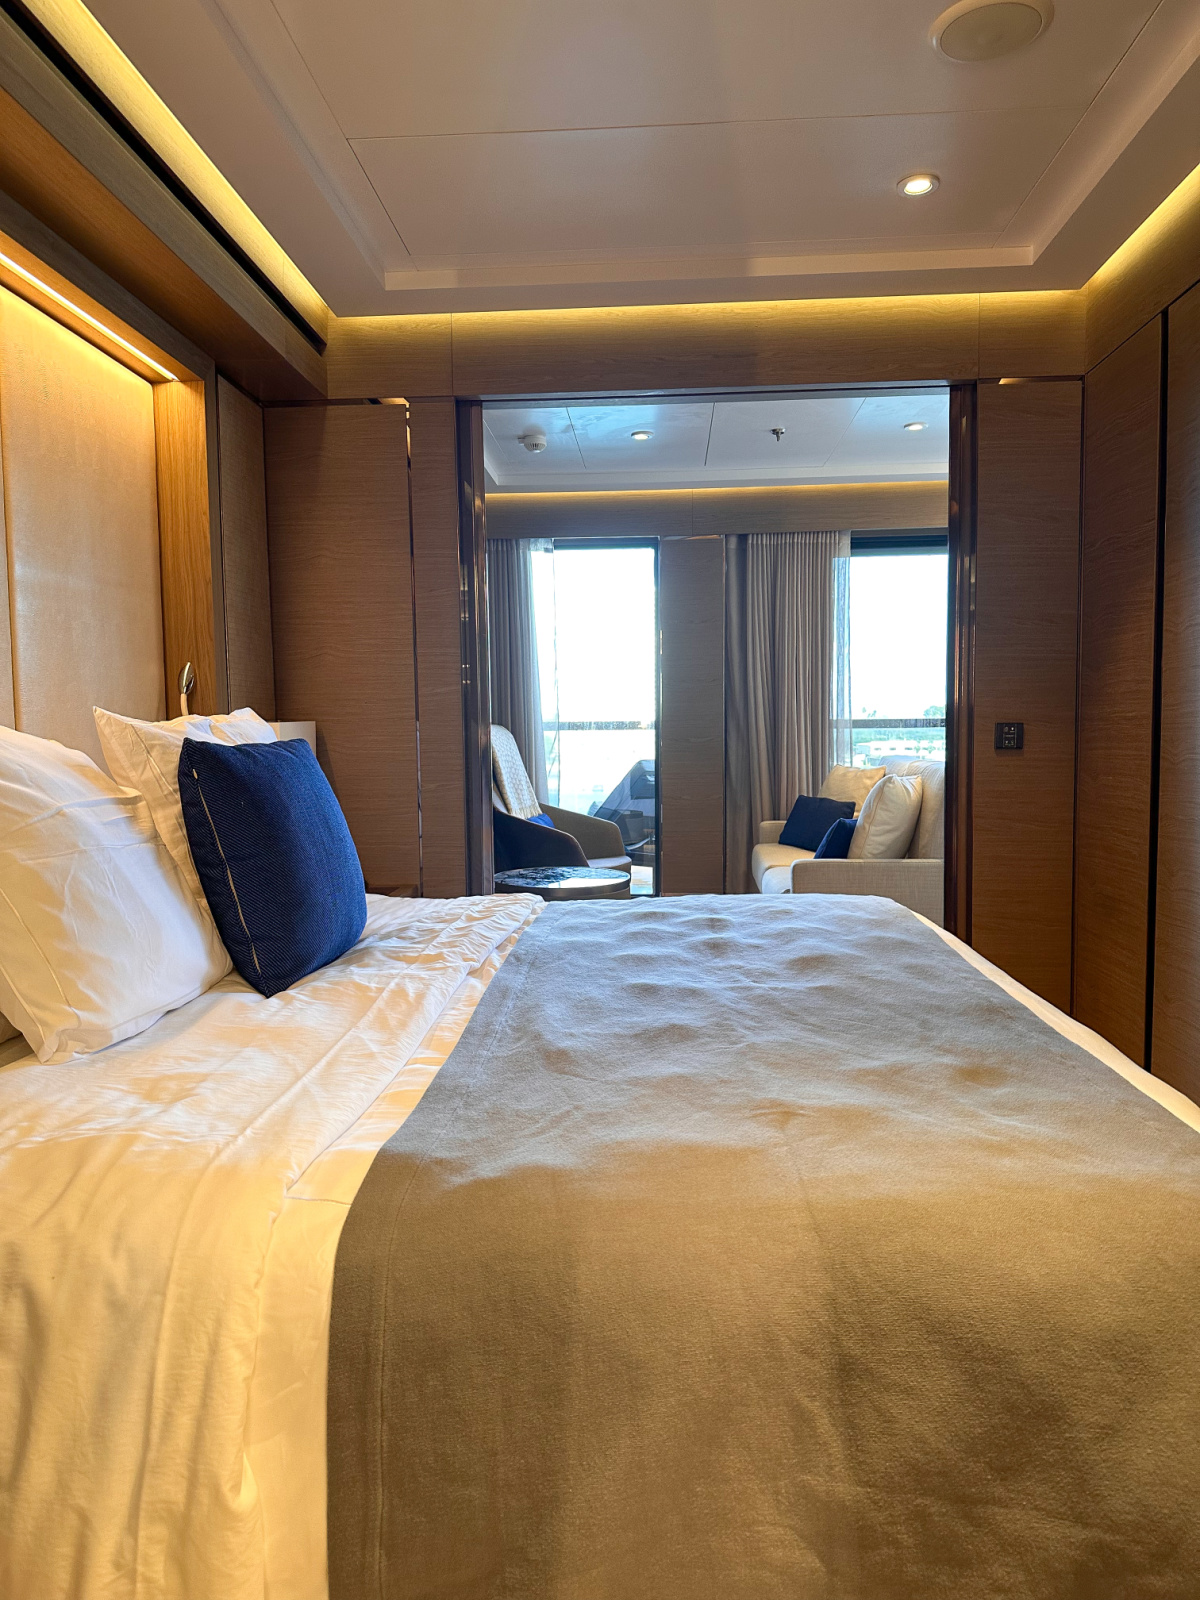 Bedroom of Signature Suite on Evrima yacht.